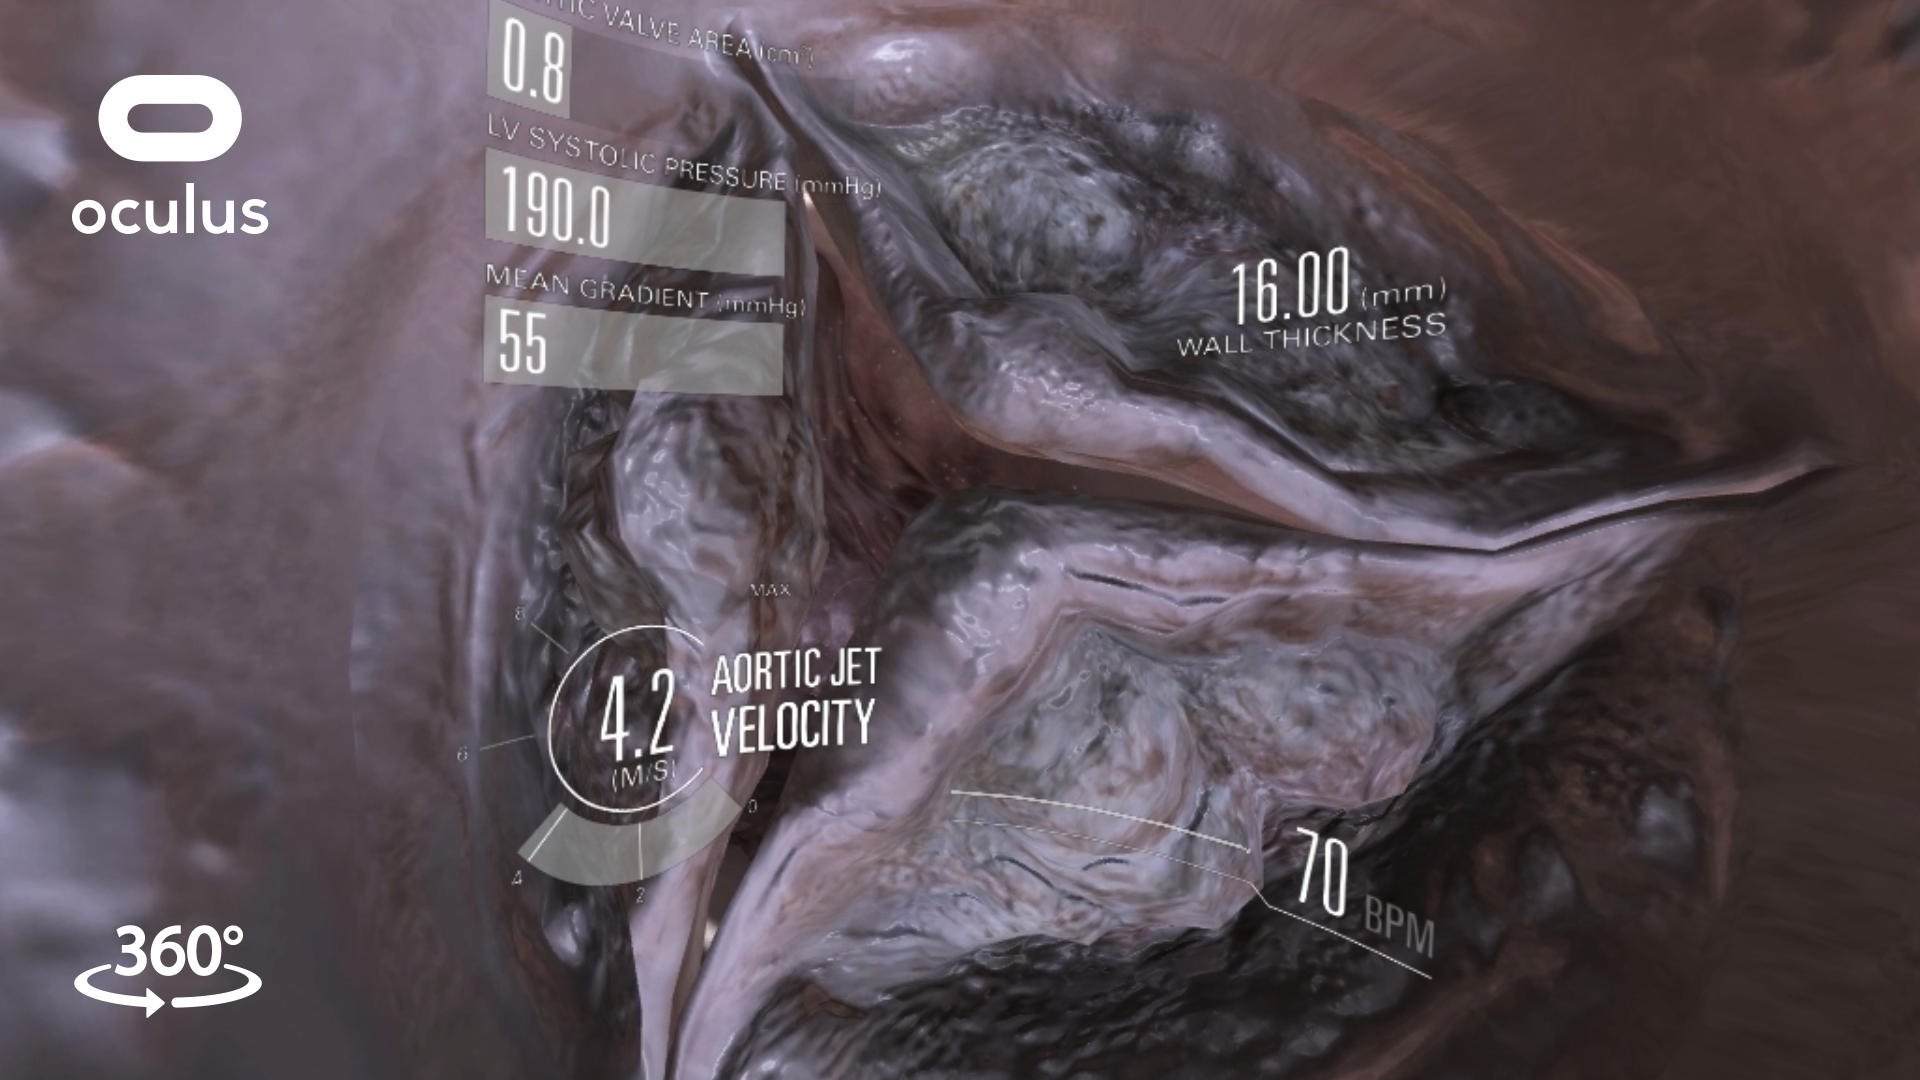 VR heart valve with graphics overlay displaying LV systolic pressure, aortic jet velocity and wall thickness